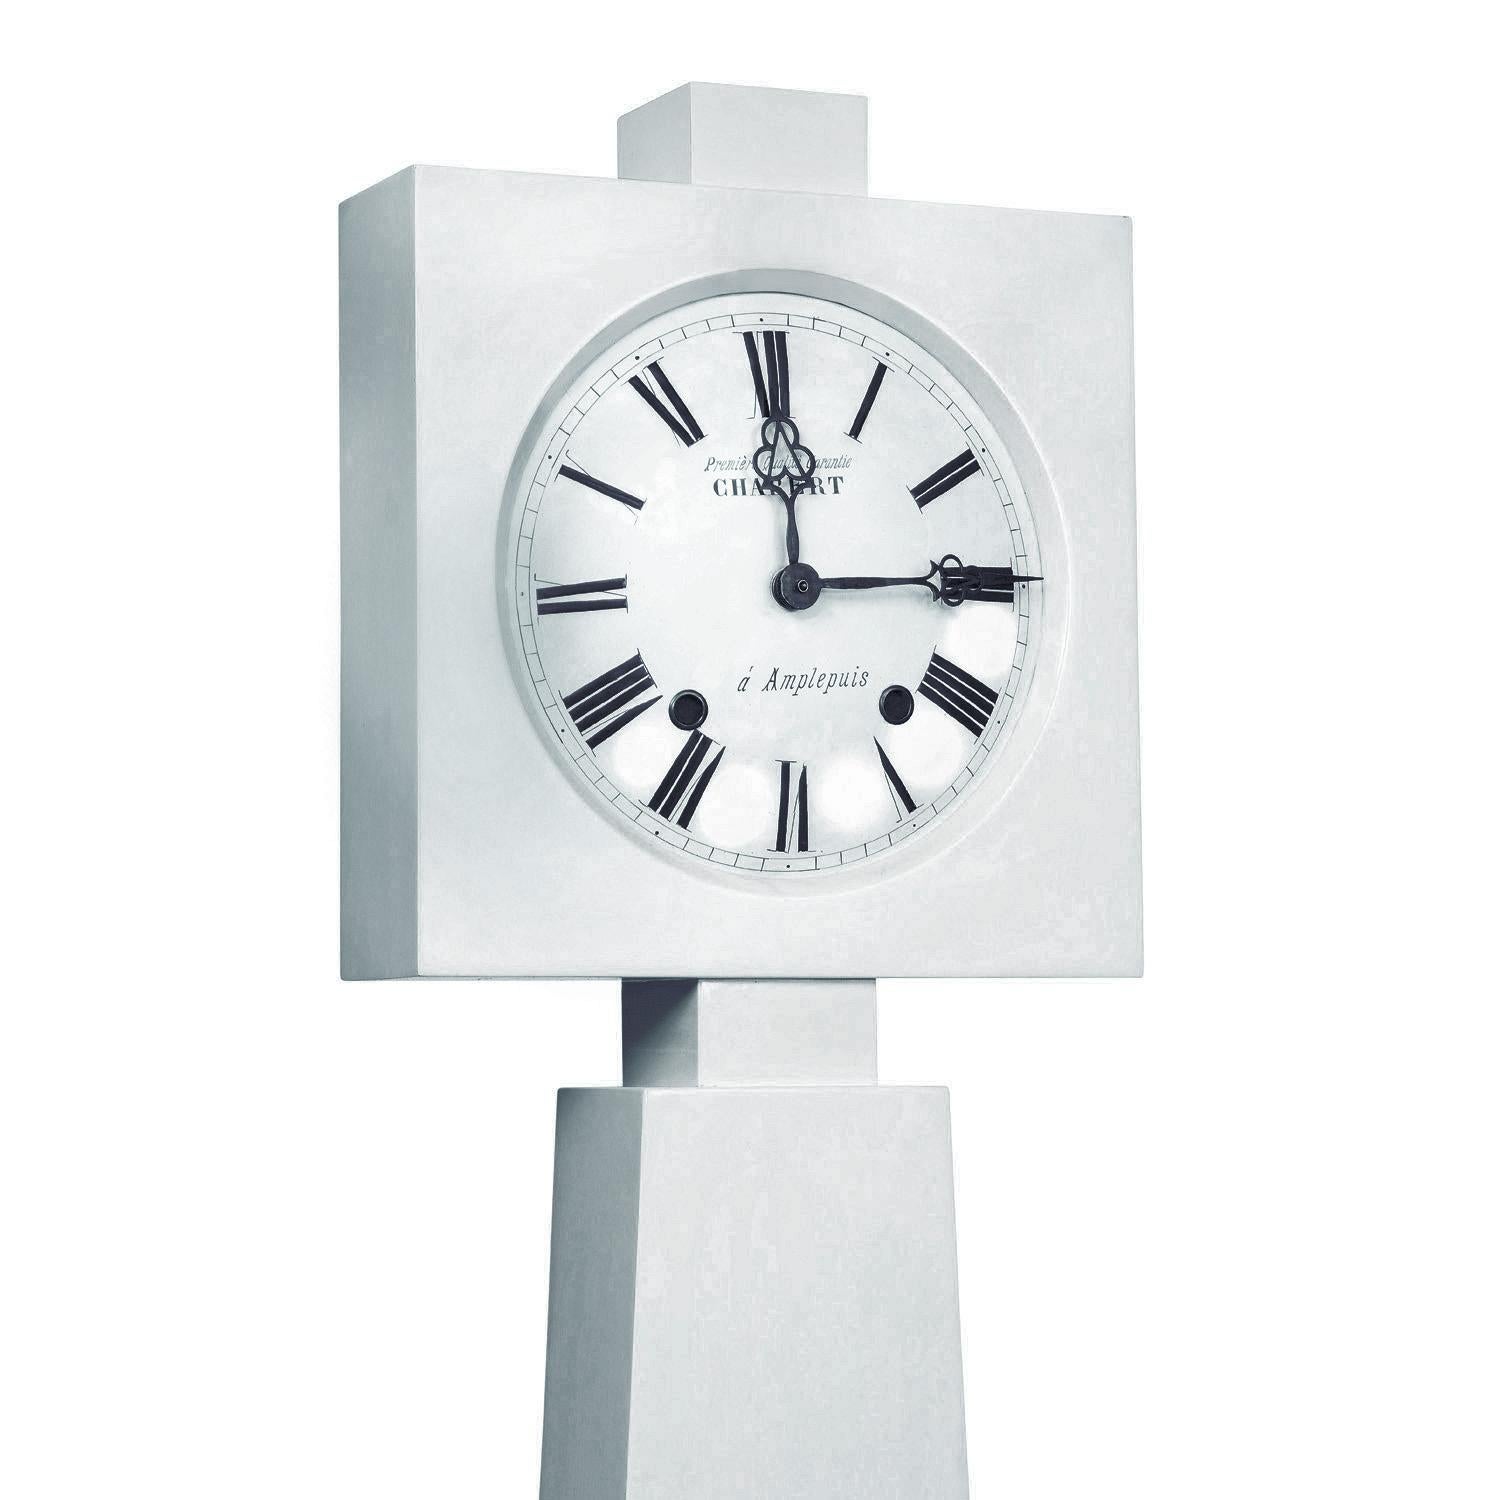 American Tommi Parzinger Rare Standing Clock in Pale Gray Lacquer 1950s (signed)